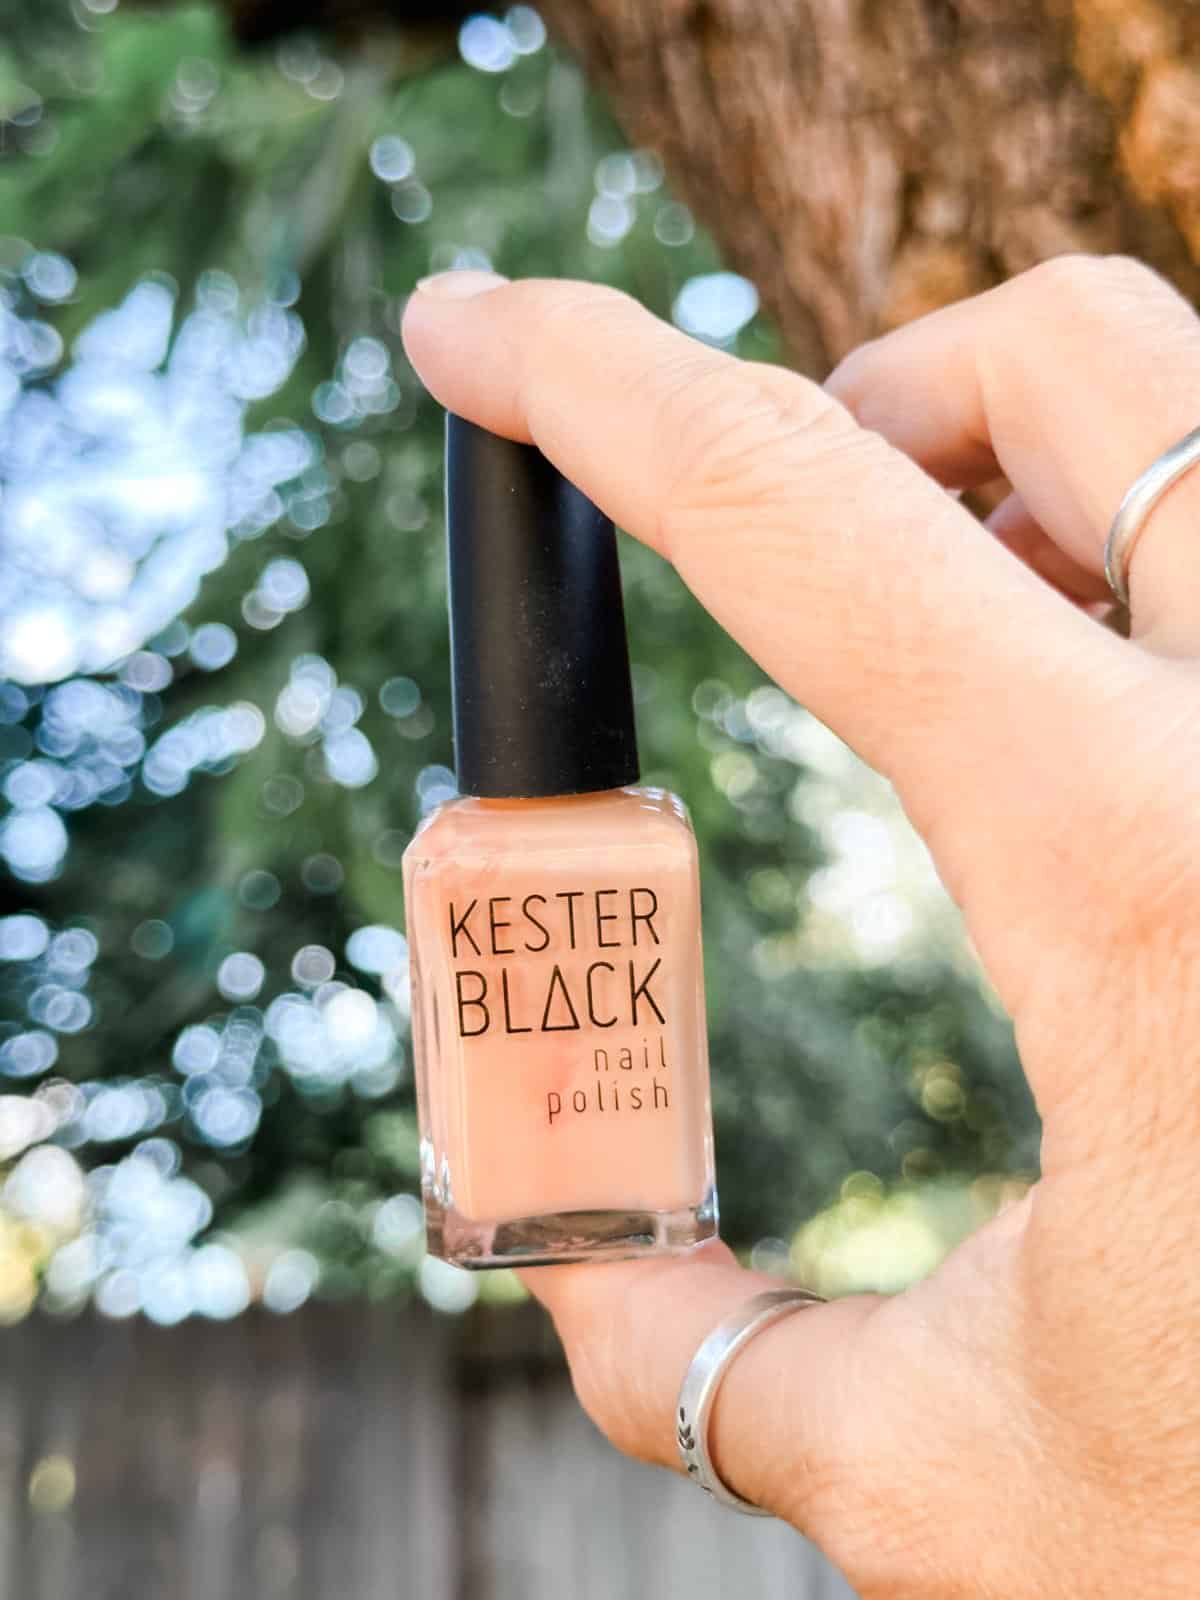 Holding a bottle of Kester Black nail polish in the shade light peach.